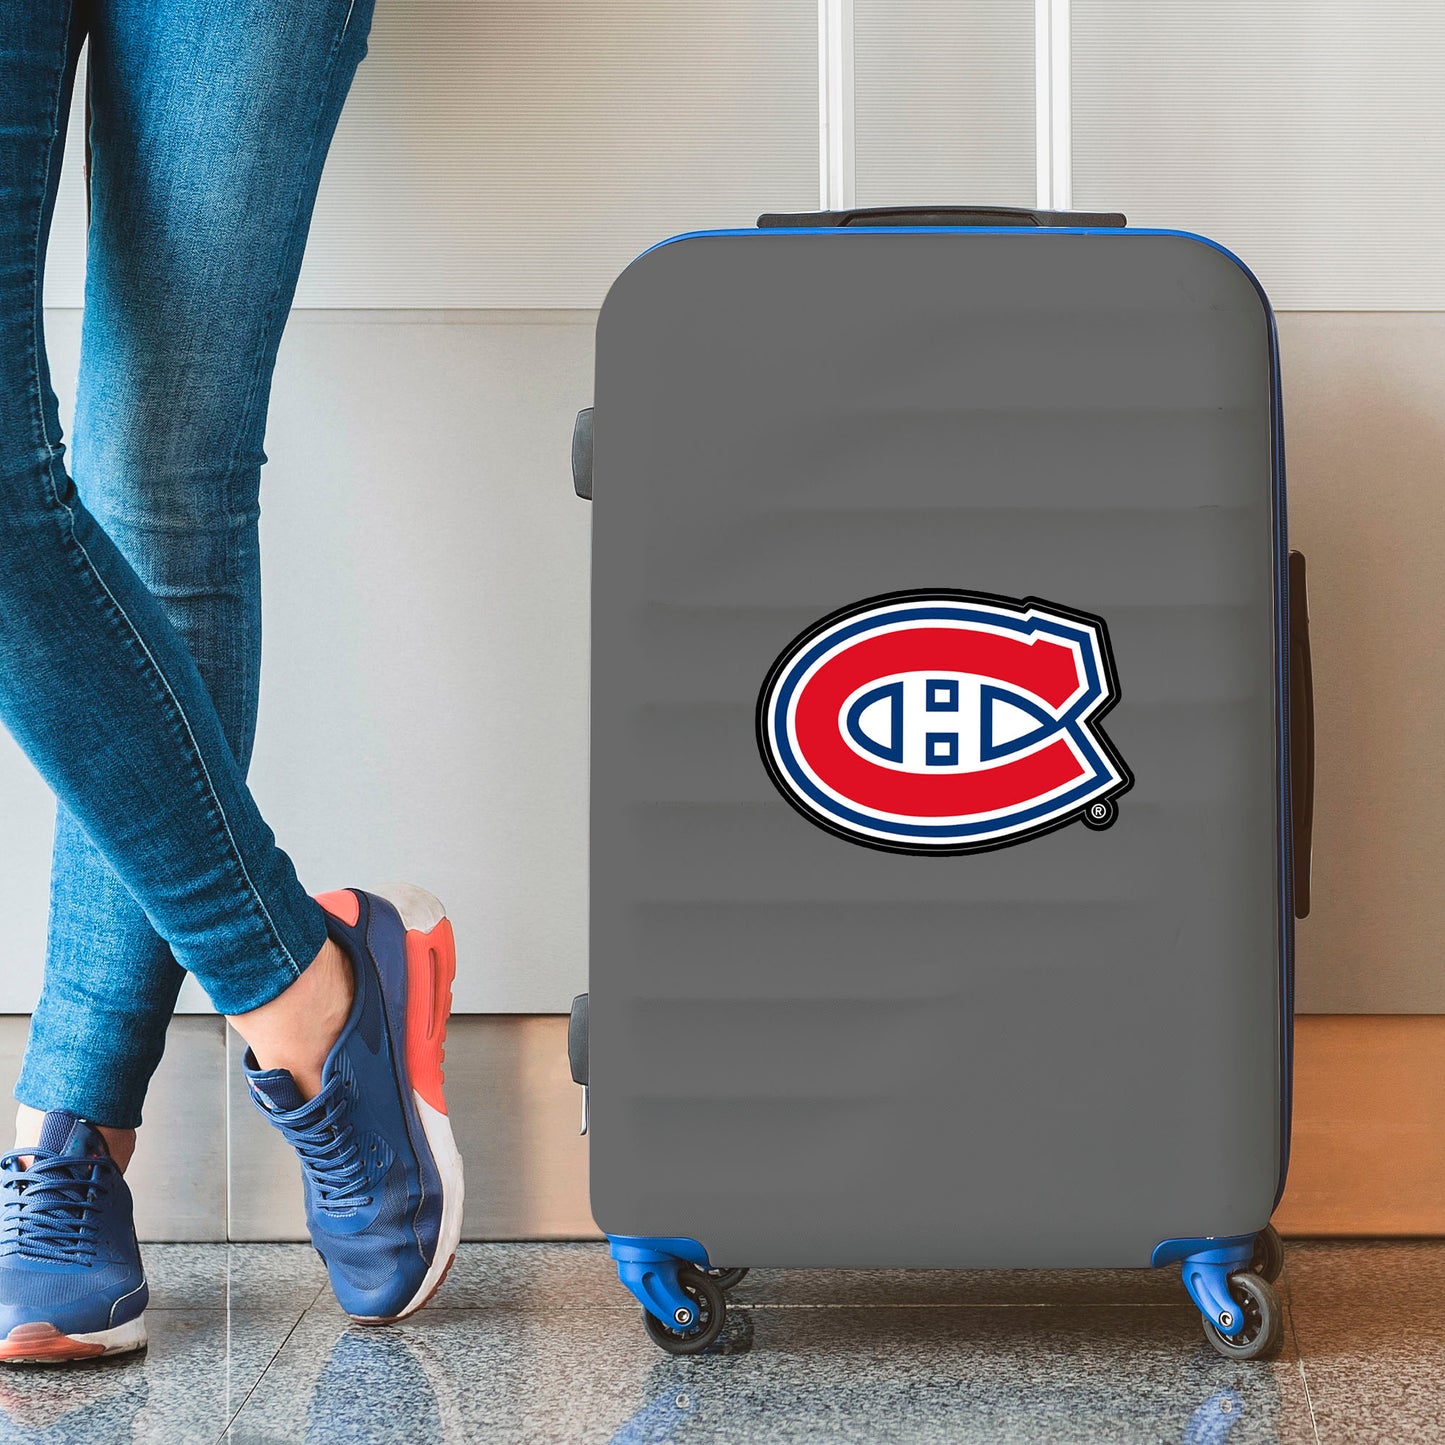 Montreal Canadiens Large Decal Sticker